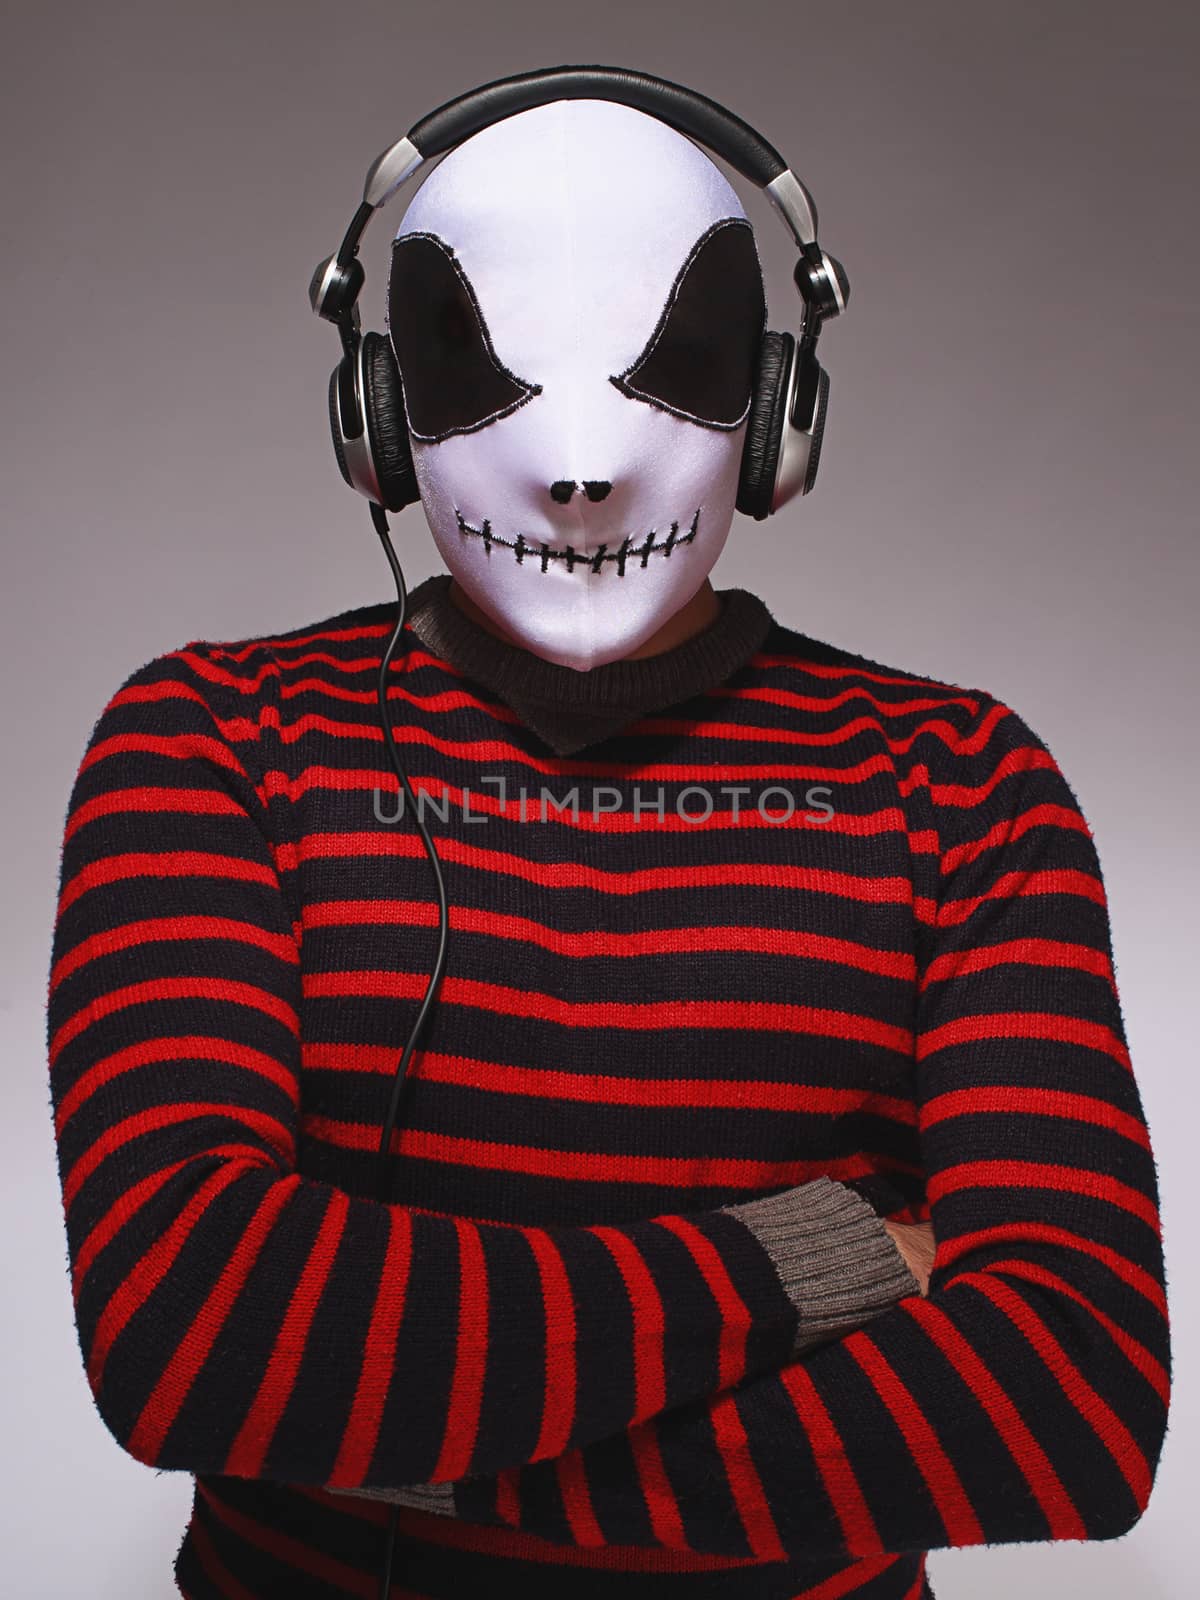 Dj wearing mask and headphones on grey background